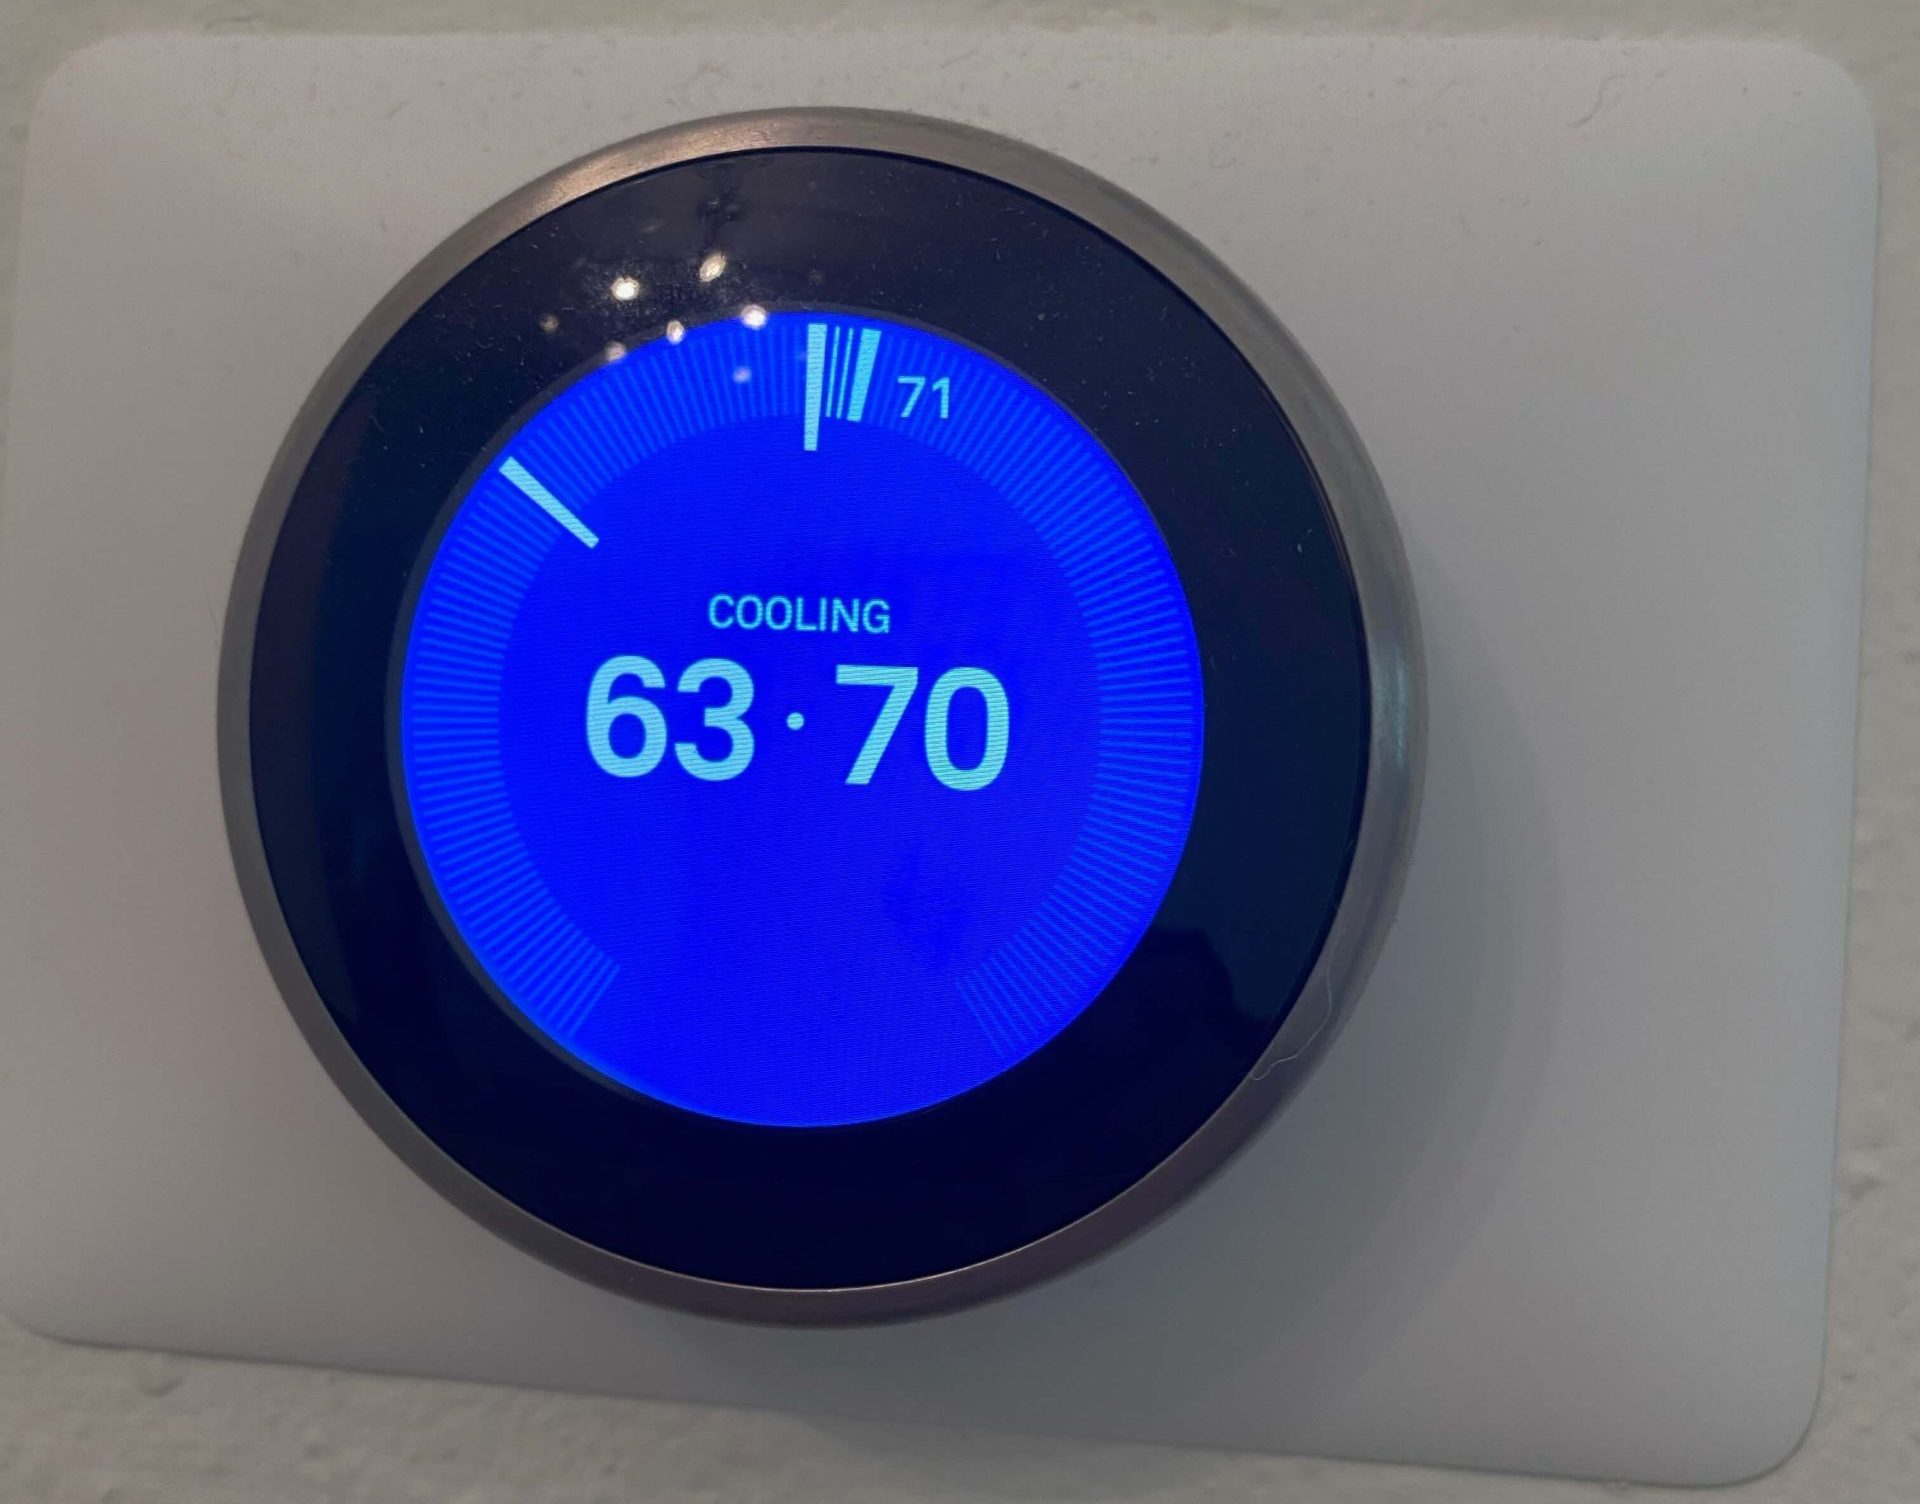 thermostat settings in florida